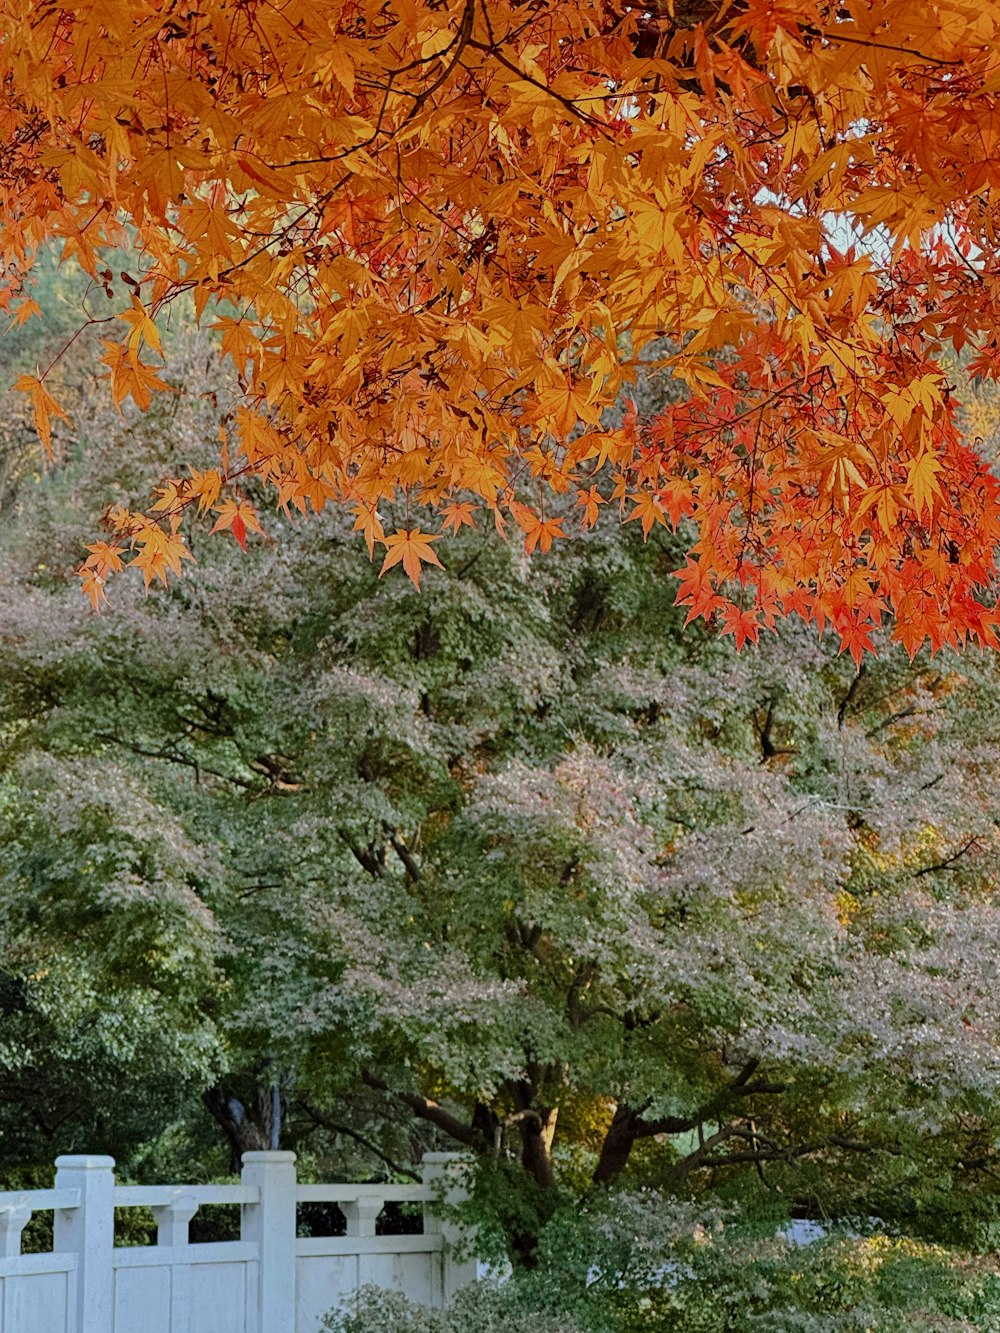 a white fence surrounded by trees with orange leaves